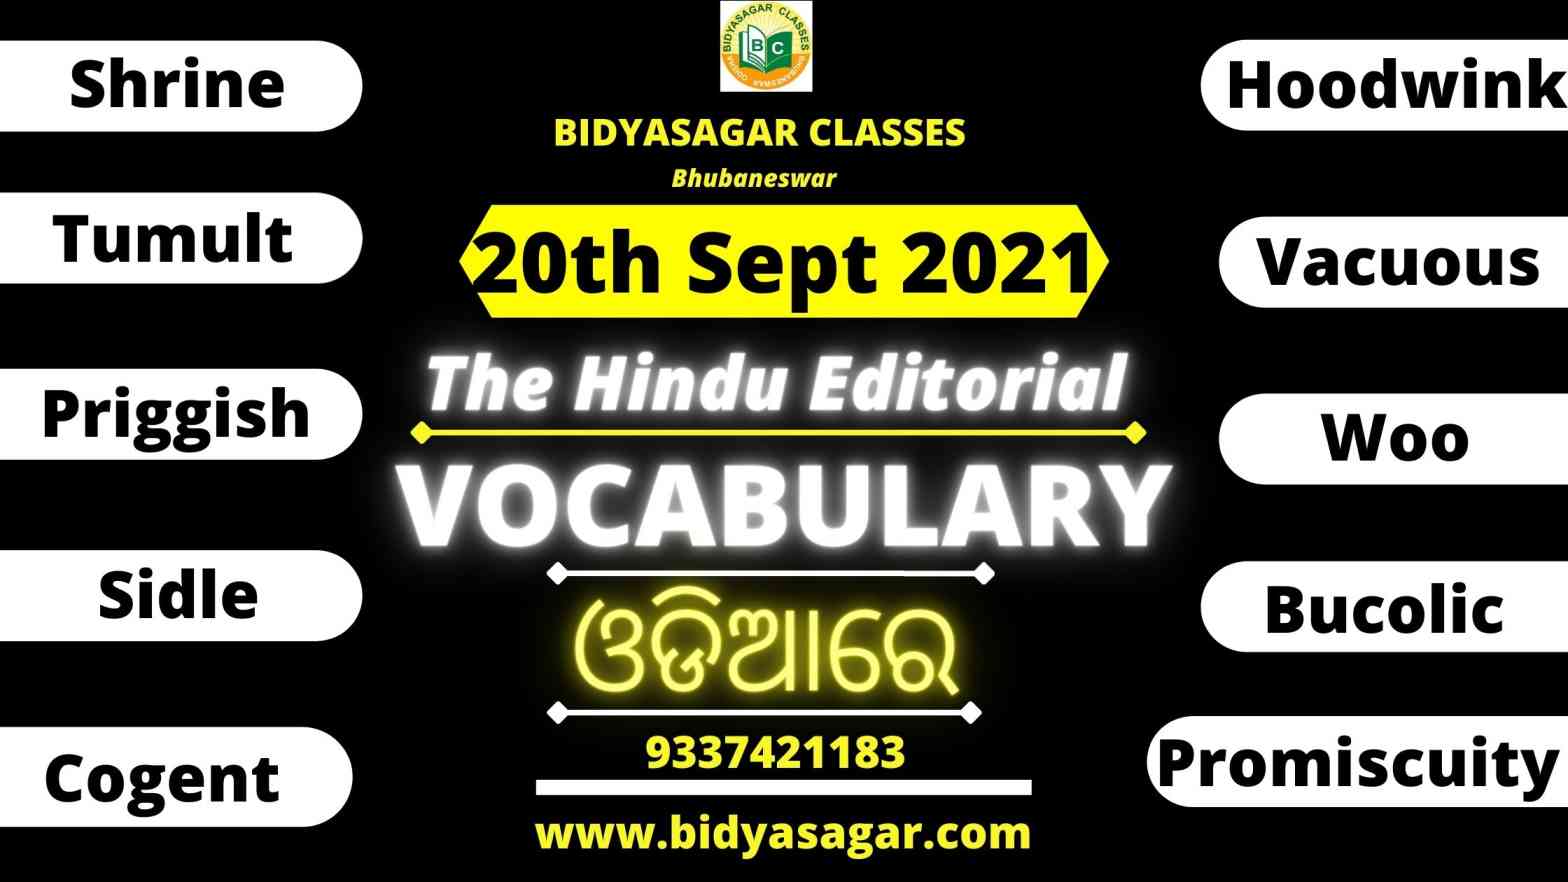 The Hindu Editorial Vocabulary of 20th September 2021